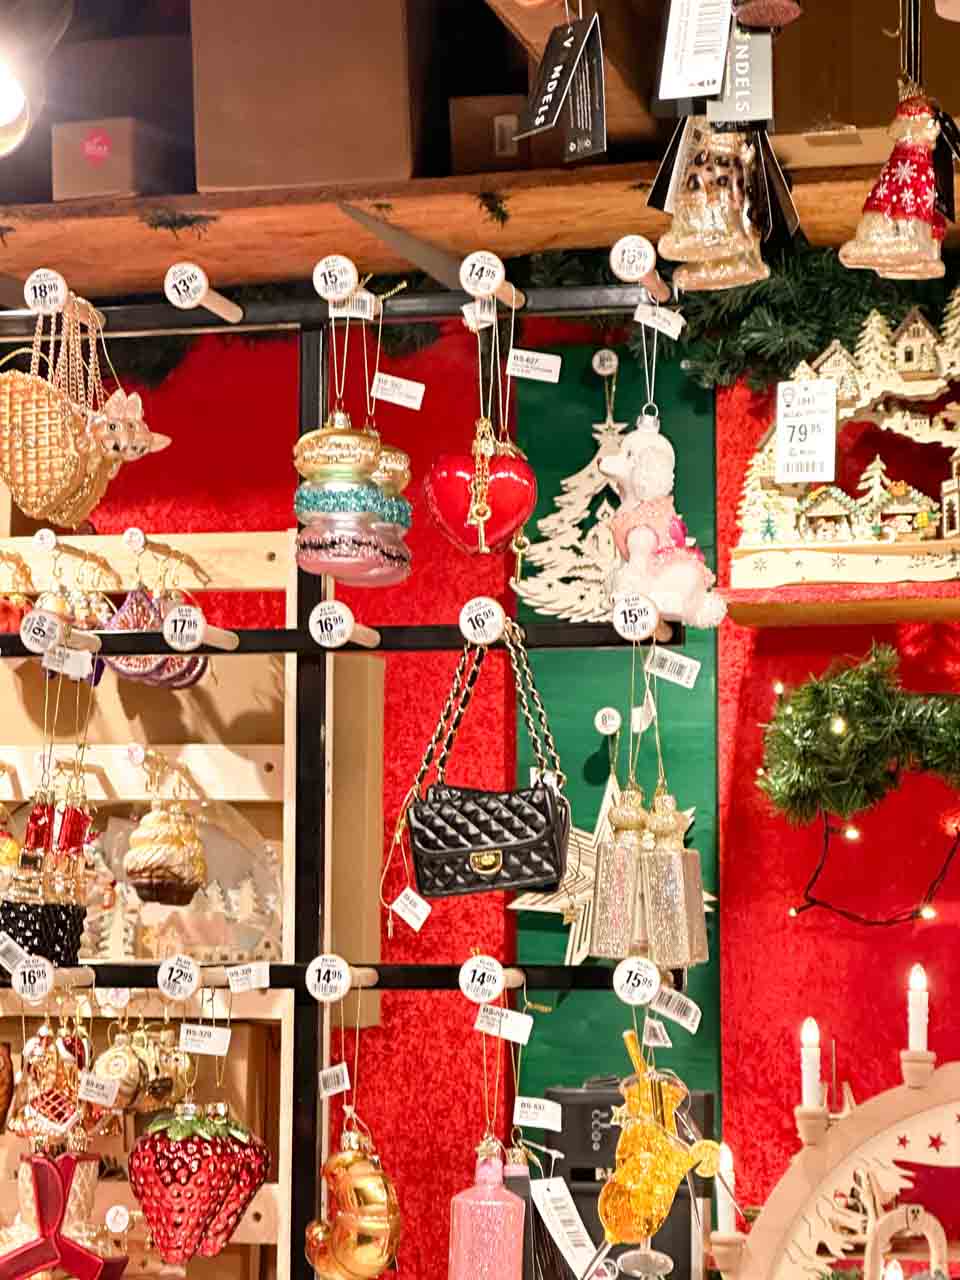 A diverse collection of Christmas ornaments, including macarons and handbags, with price tags, at a Basel Christmas market stall